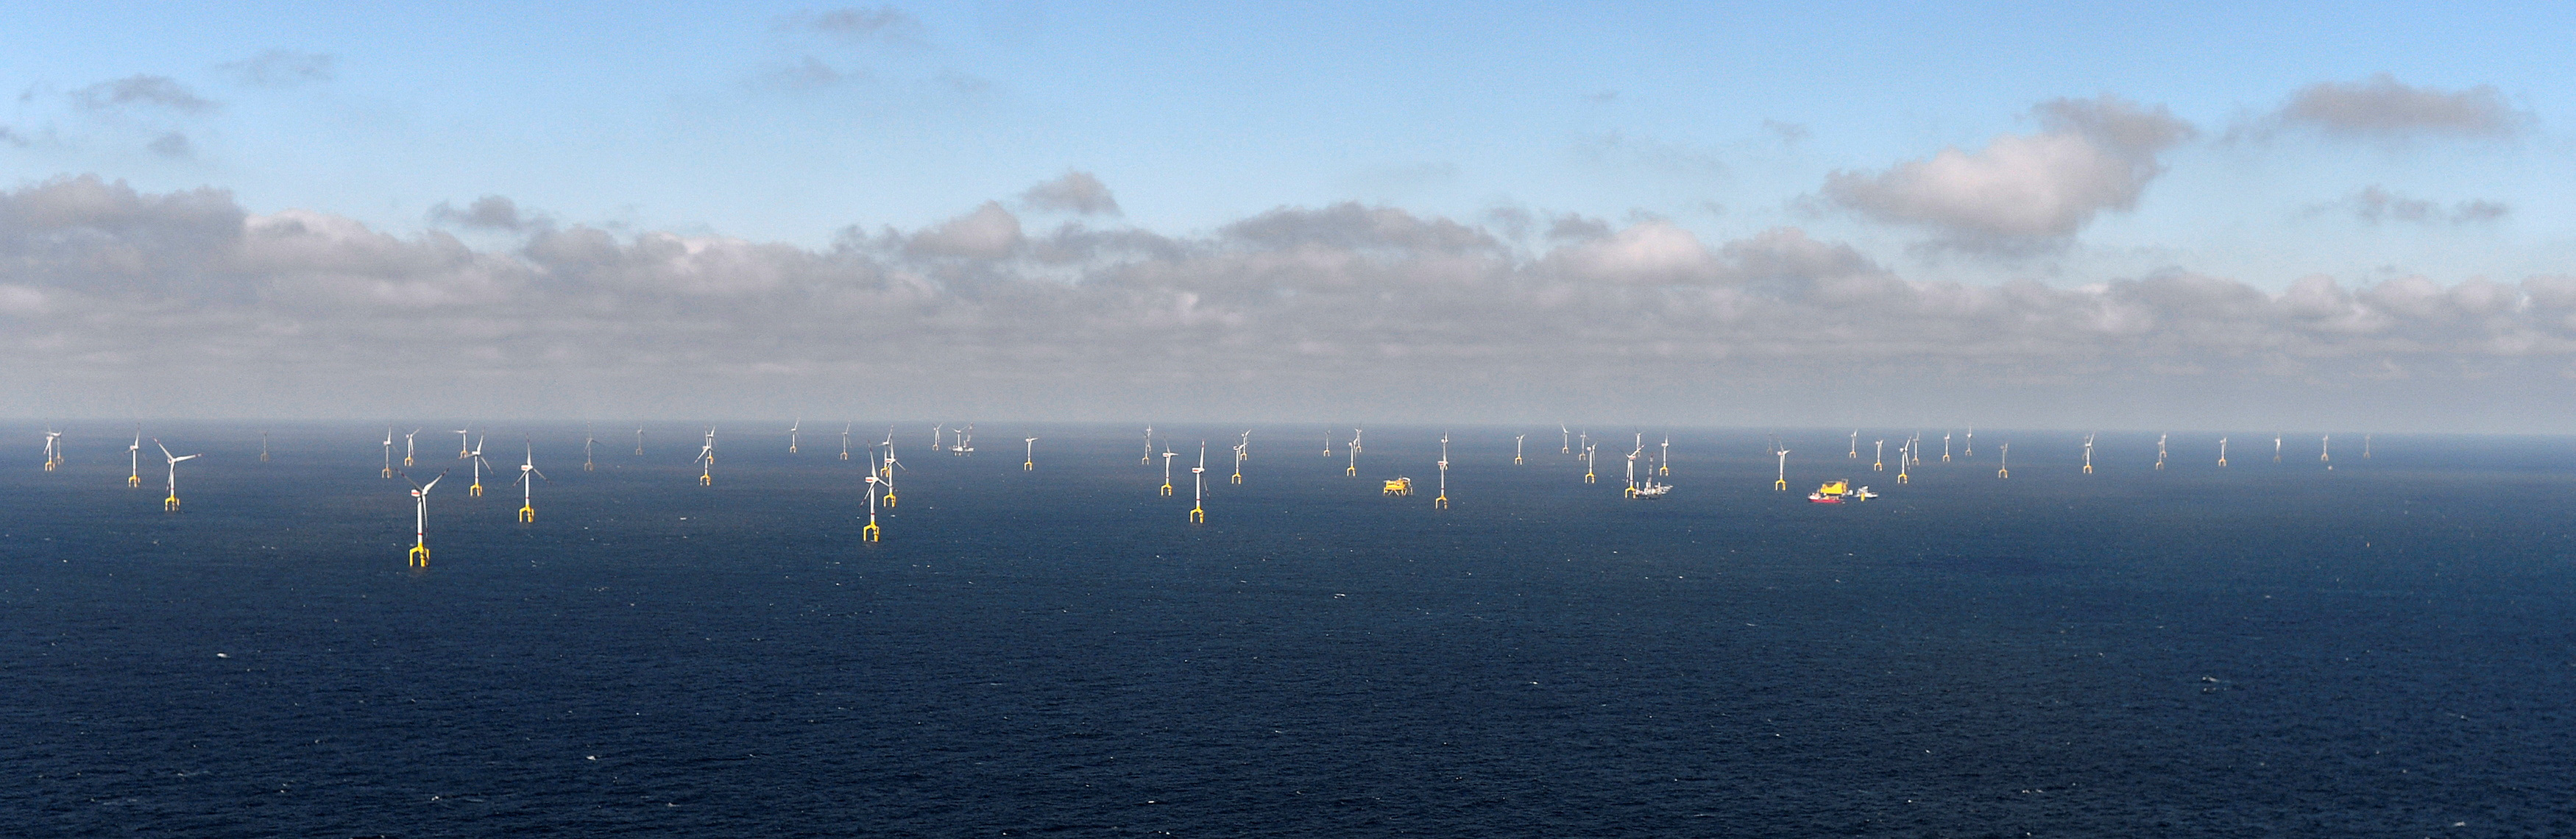 Wind turbines of the wind farm BARD Offshore 1 stand north-west of the German island of Borkum